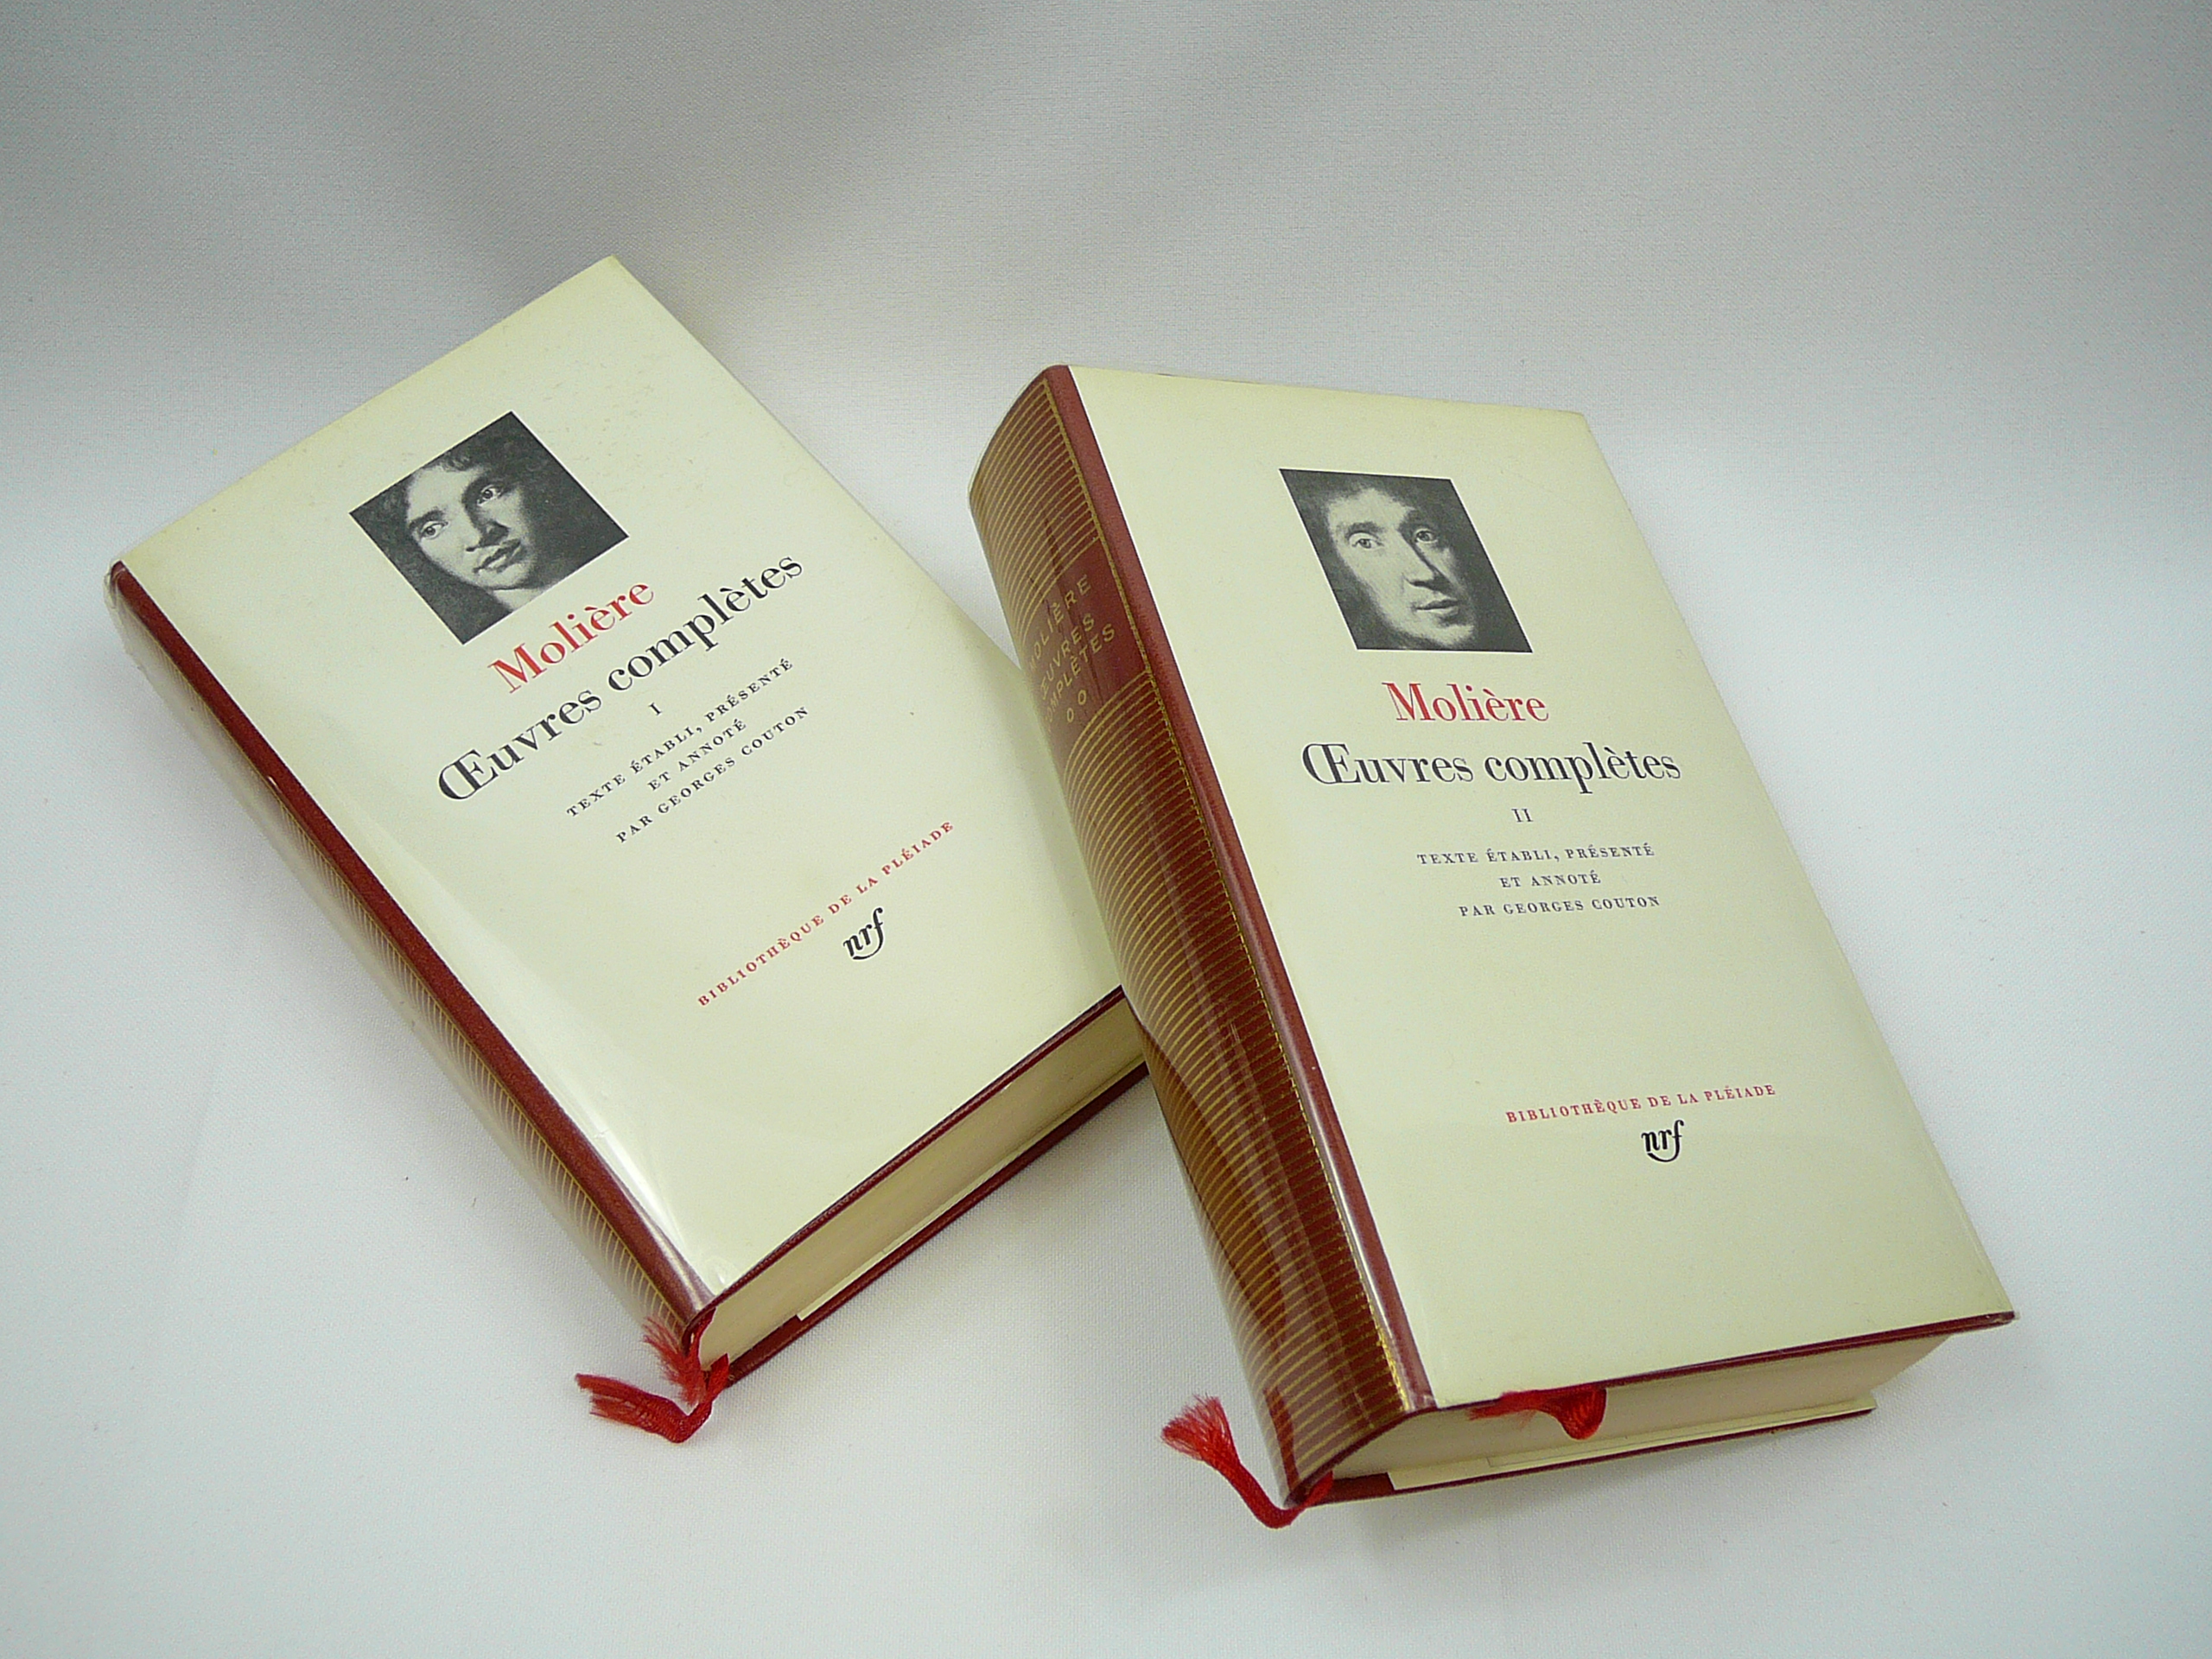 2 Volumes Oeuvres Completes Volumes 1 and 2 by Moliere